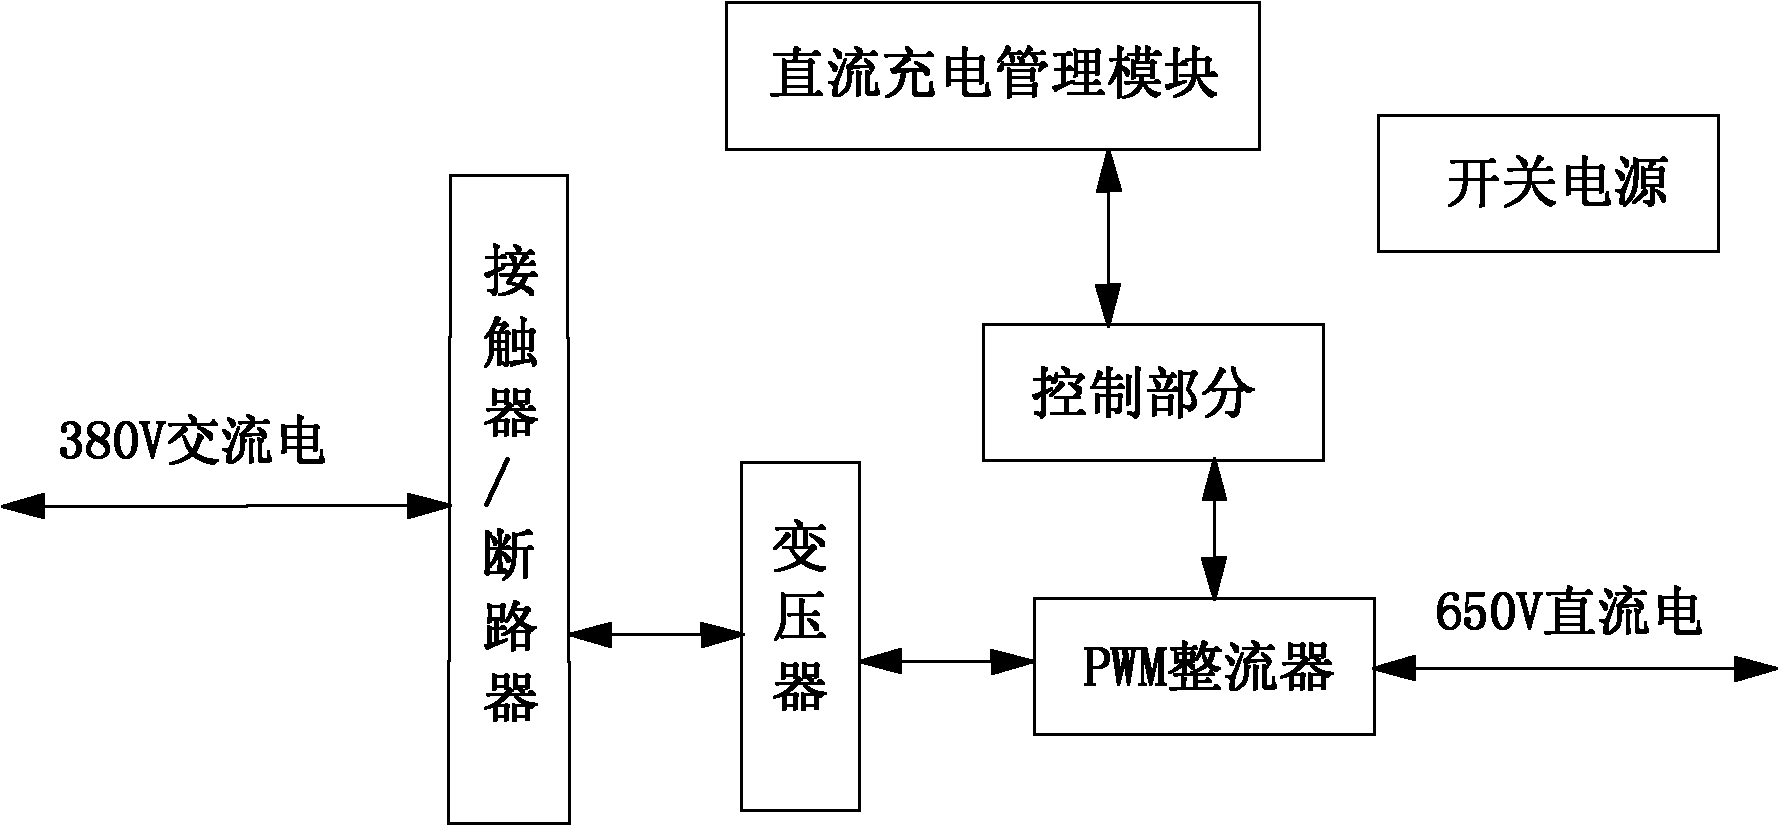 Pulse width modulation (PWM) rectification, variable-voltage and variable-current pulse charging system of electric vehicle